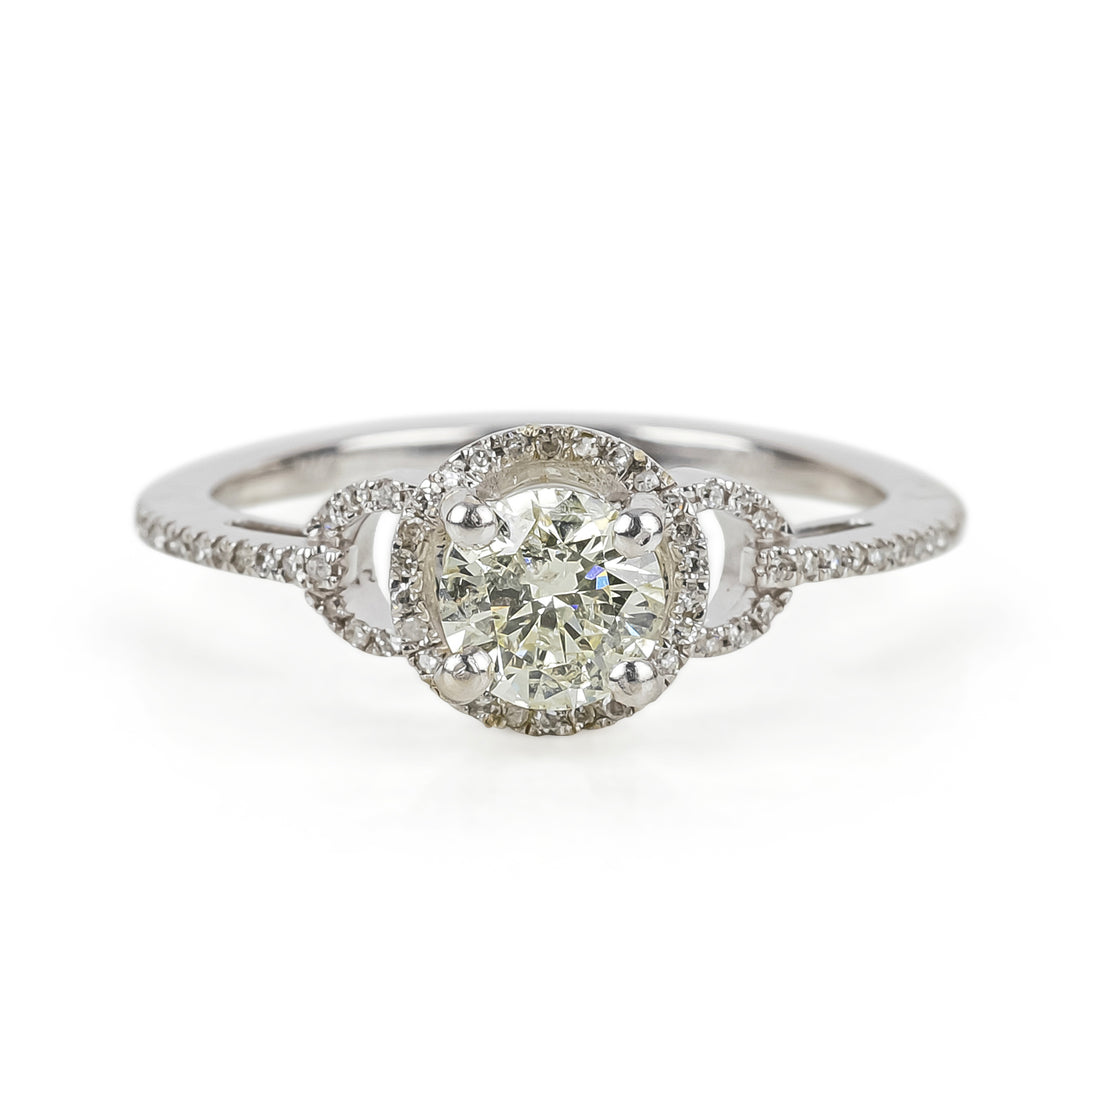 14K White Gold Diamond Solitaire with Side Stones Ring